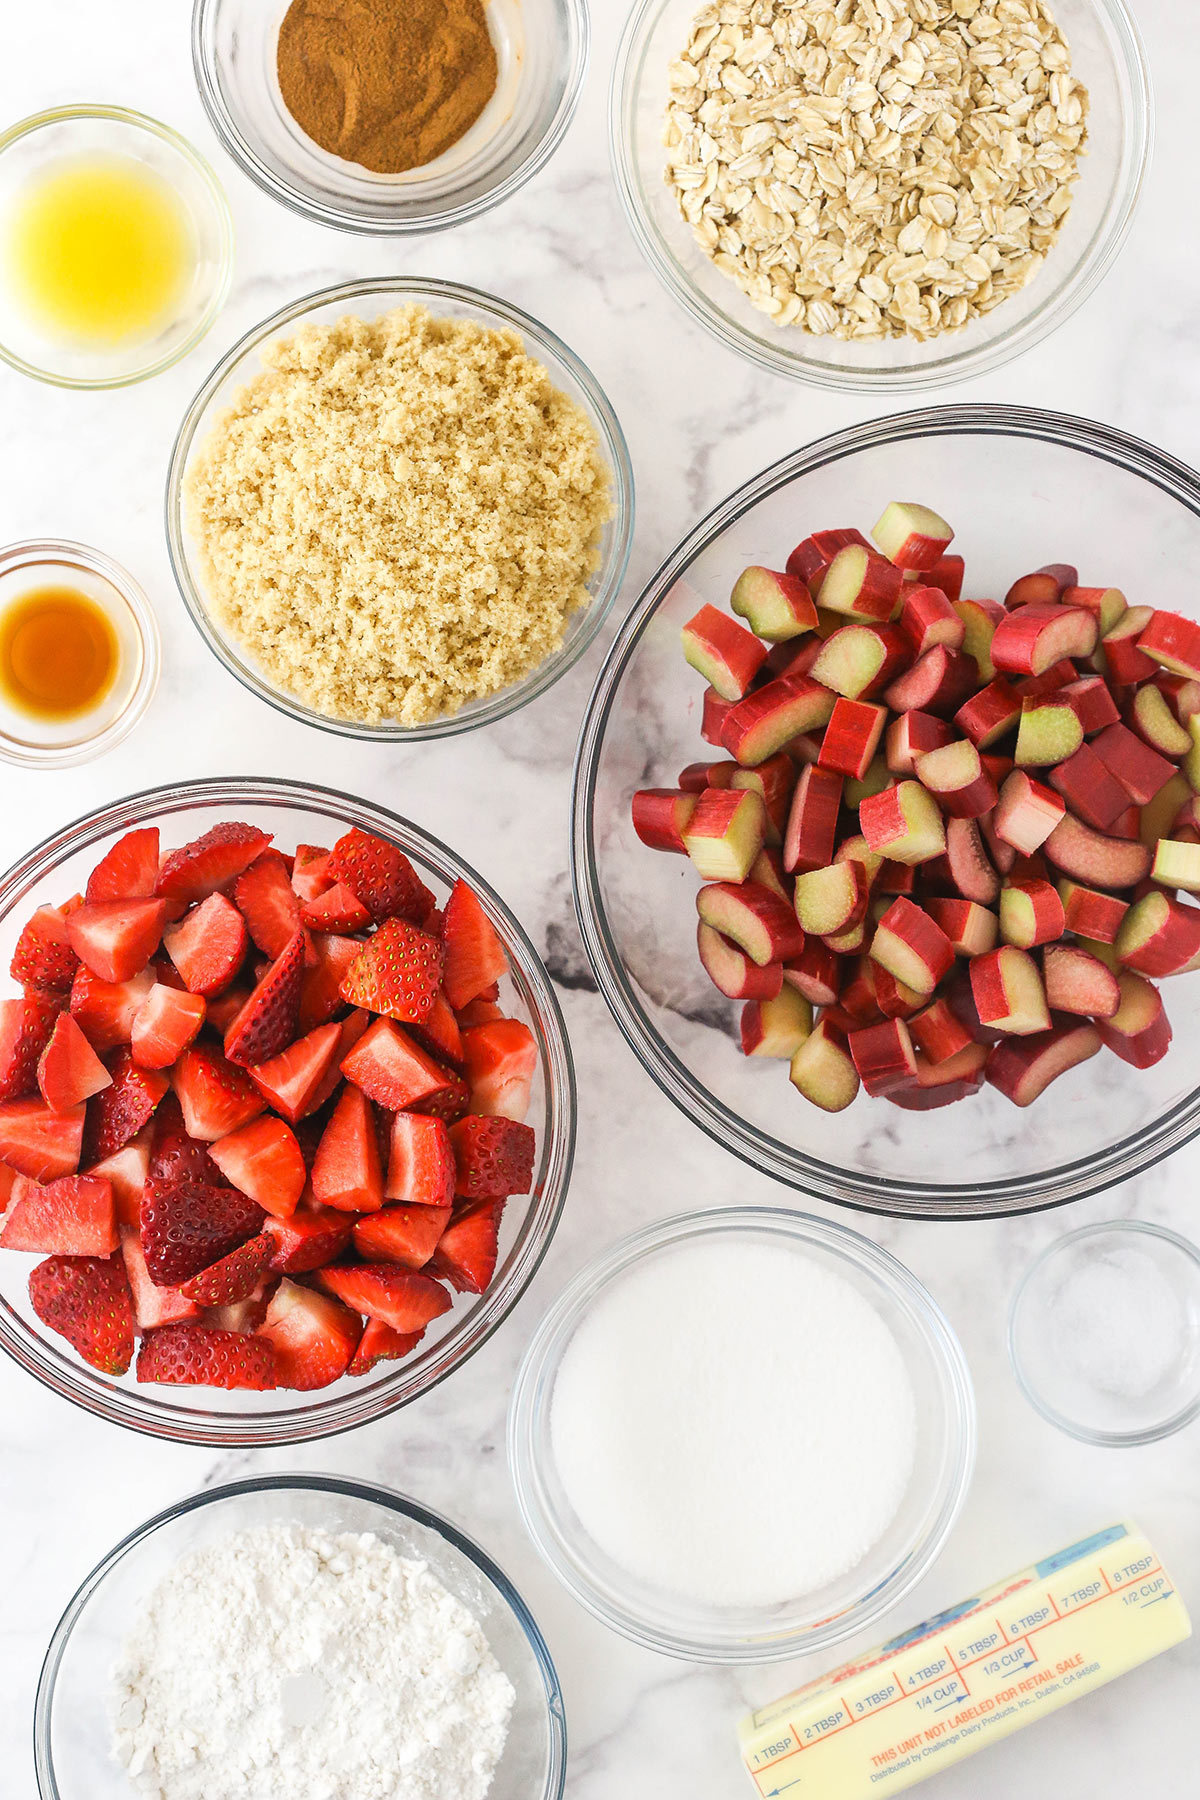 The ingredients used in the strawberry rhubarb crisp